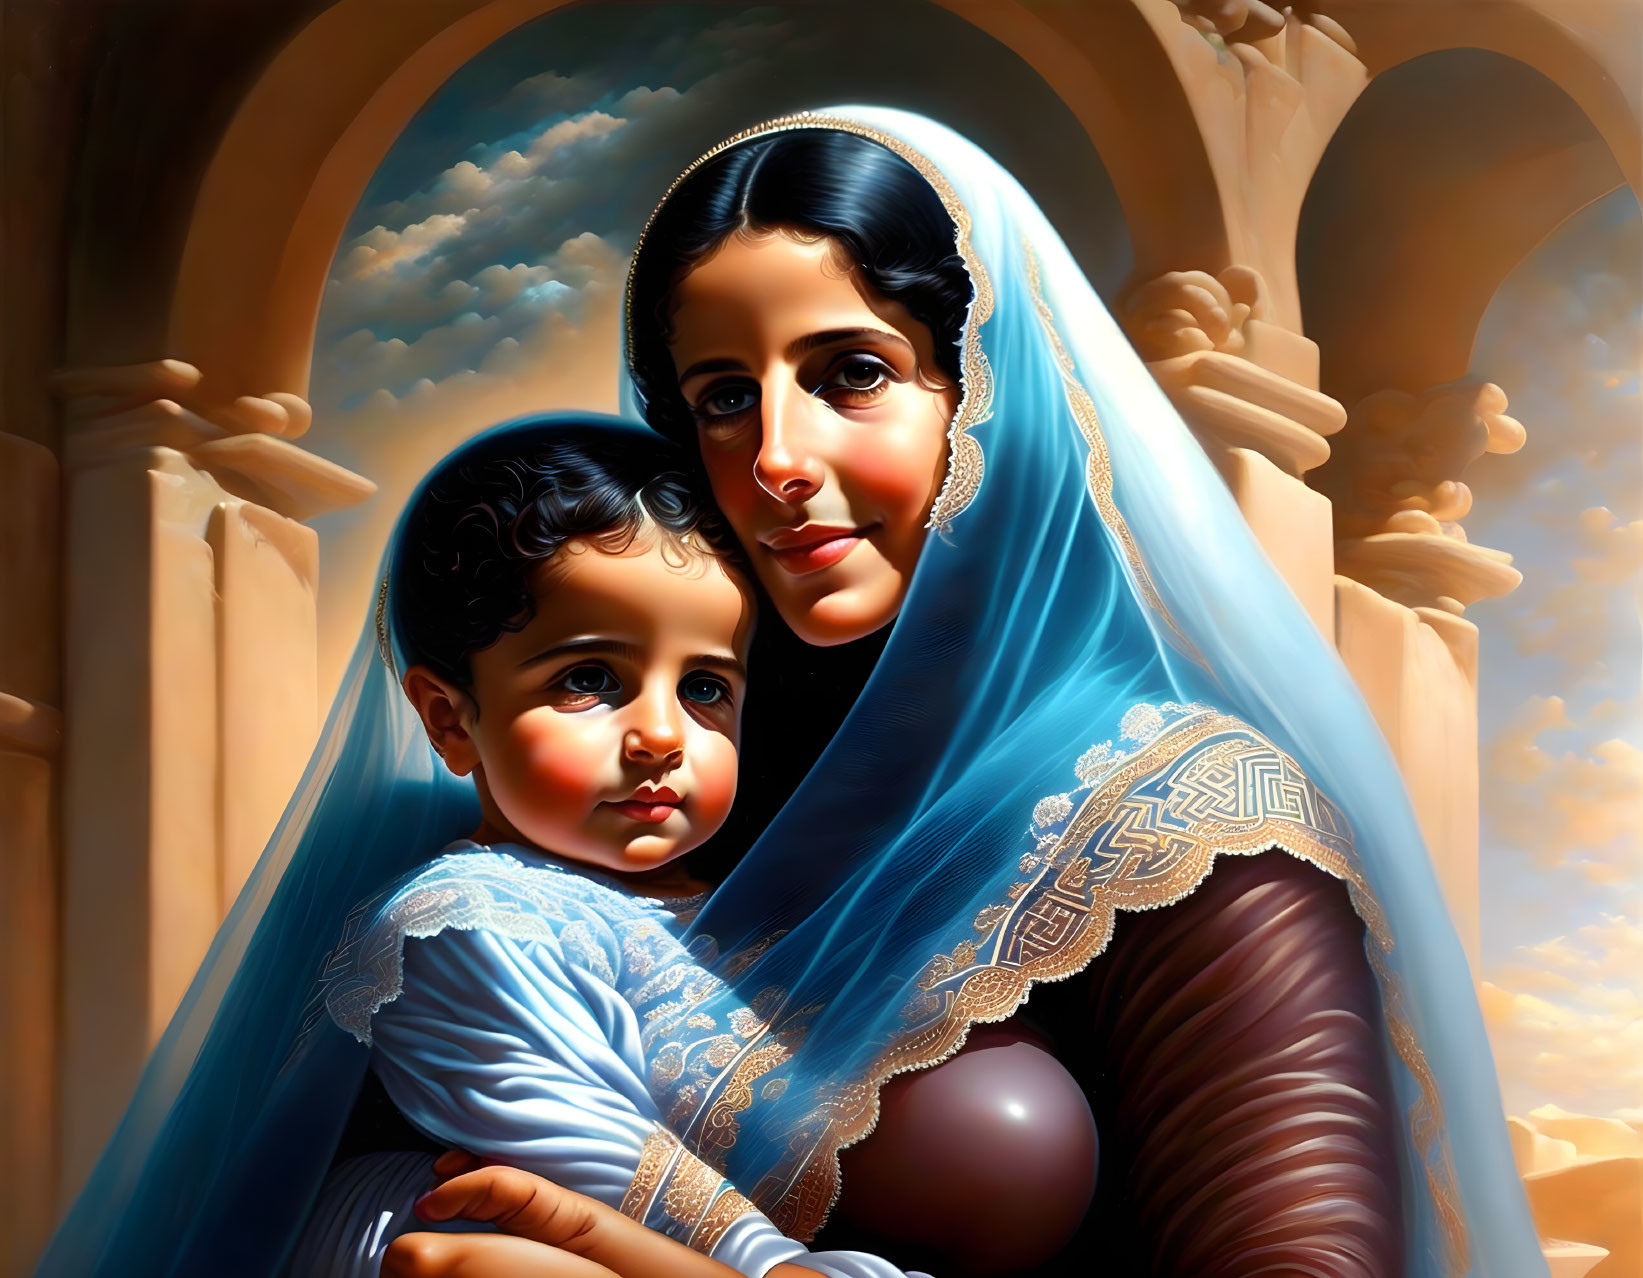 Traditional Attire Woman and Child Artwork with Architectural Background